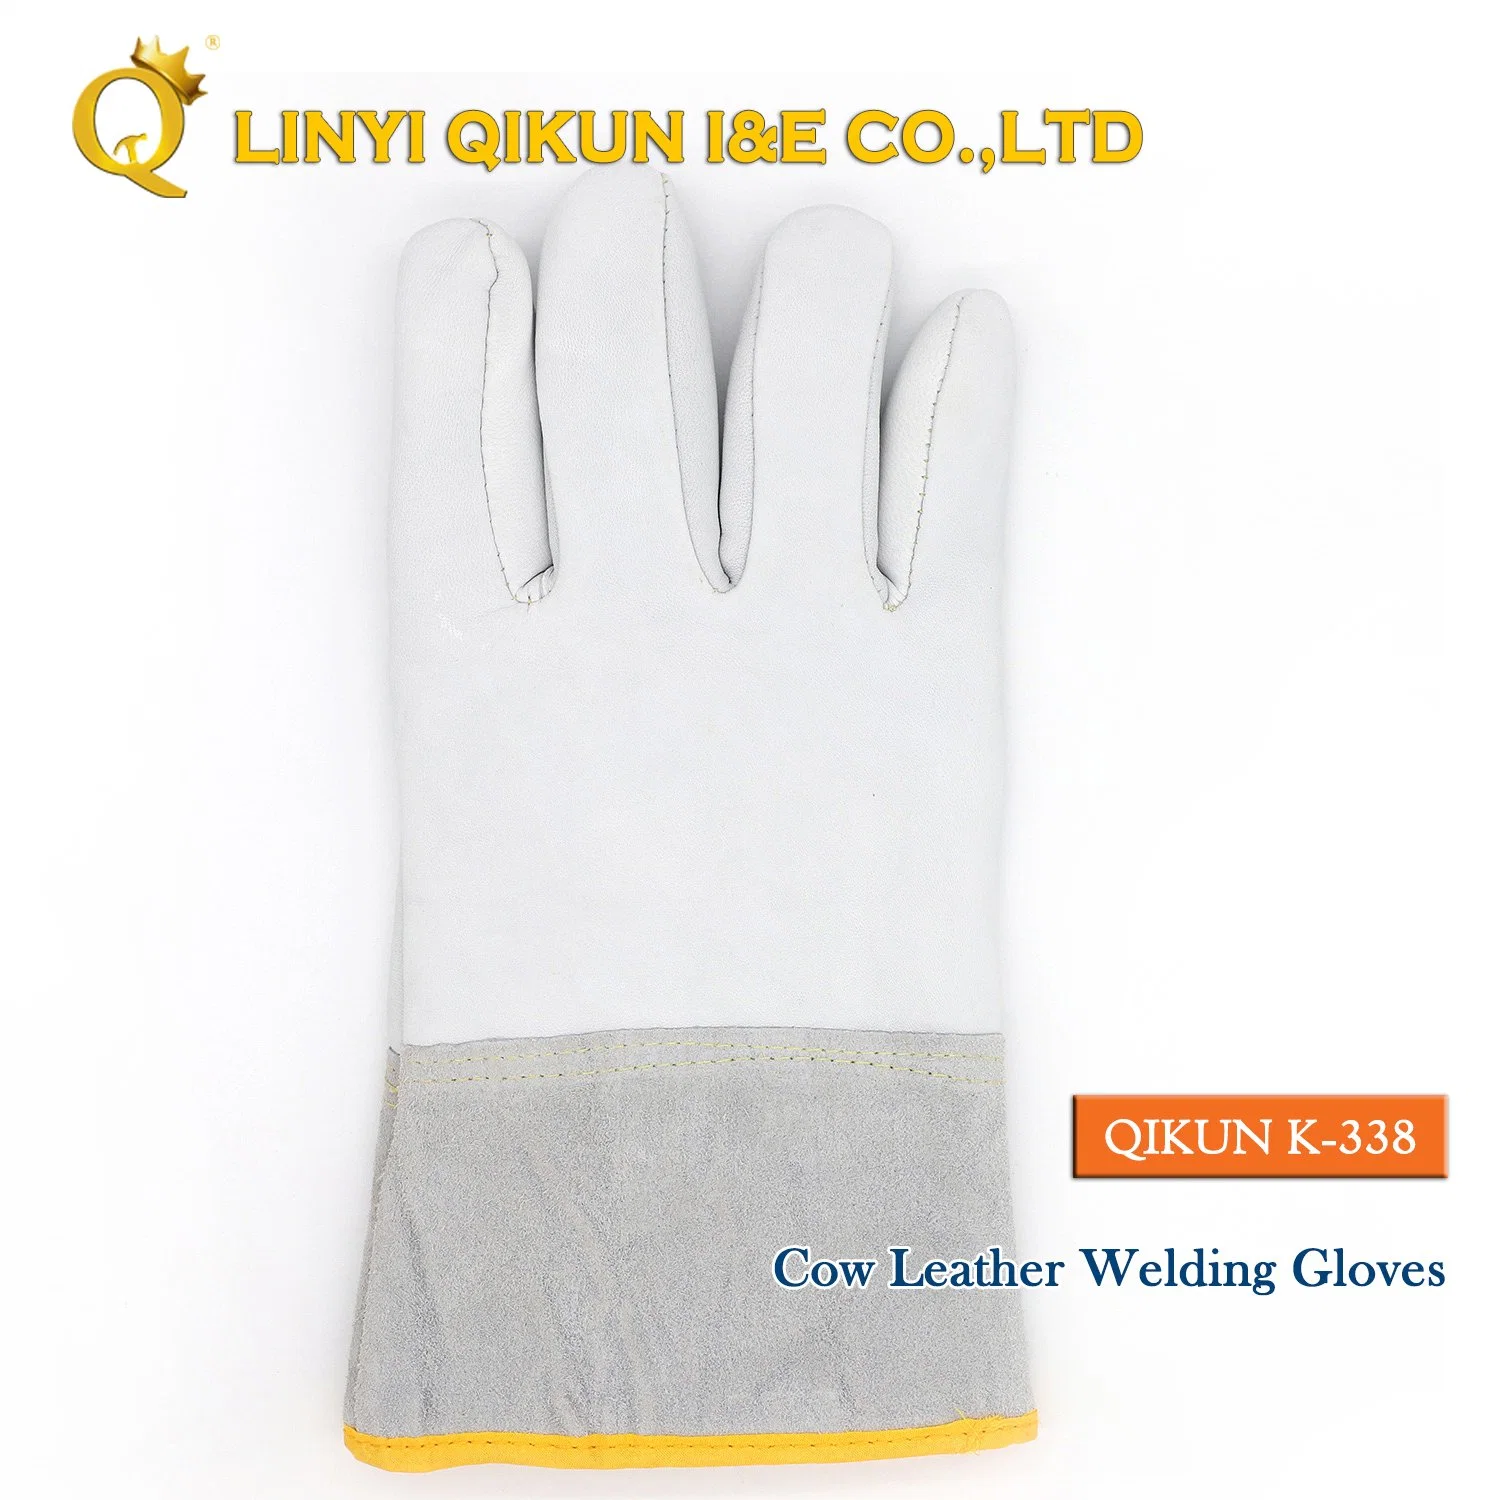 K-338 Cow Split Full Palm Liner Rubberized Cuff Leather Labor Protect Industrial Working Safety Welding Gloves